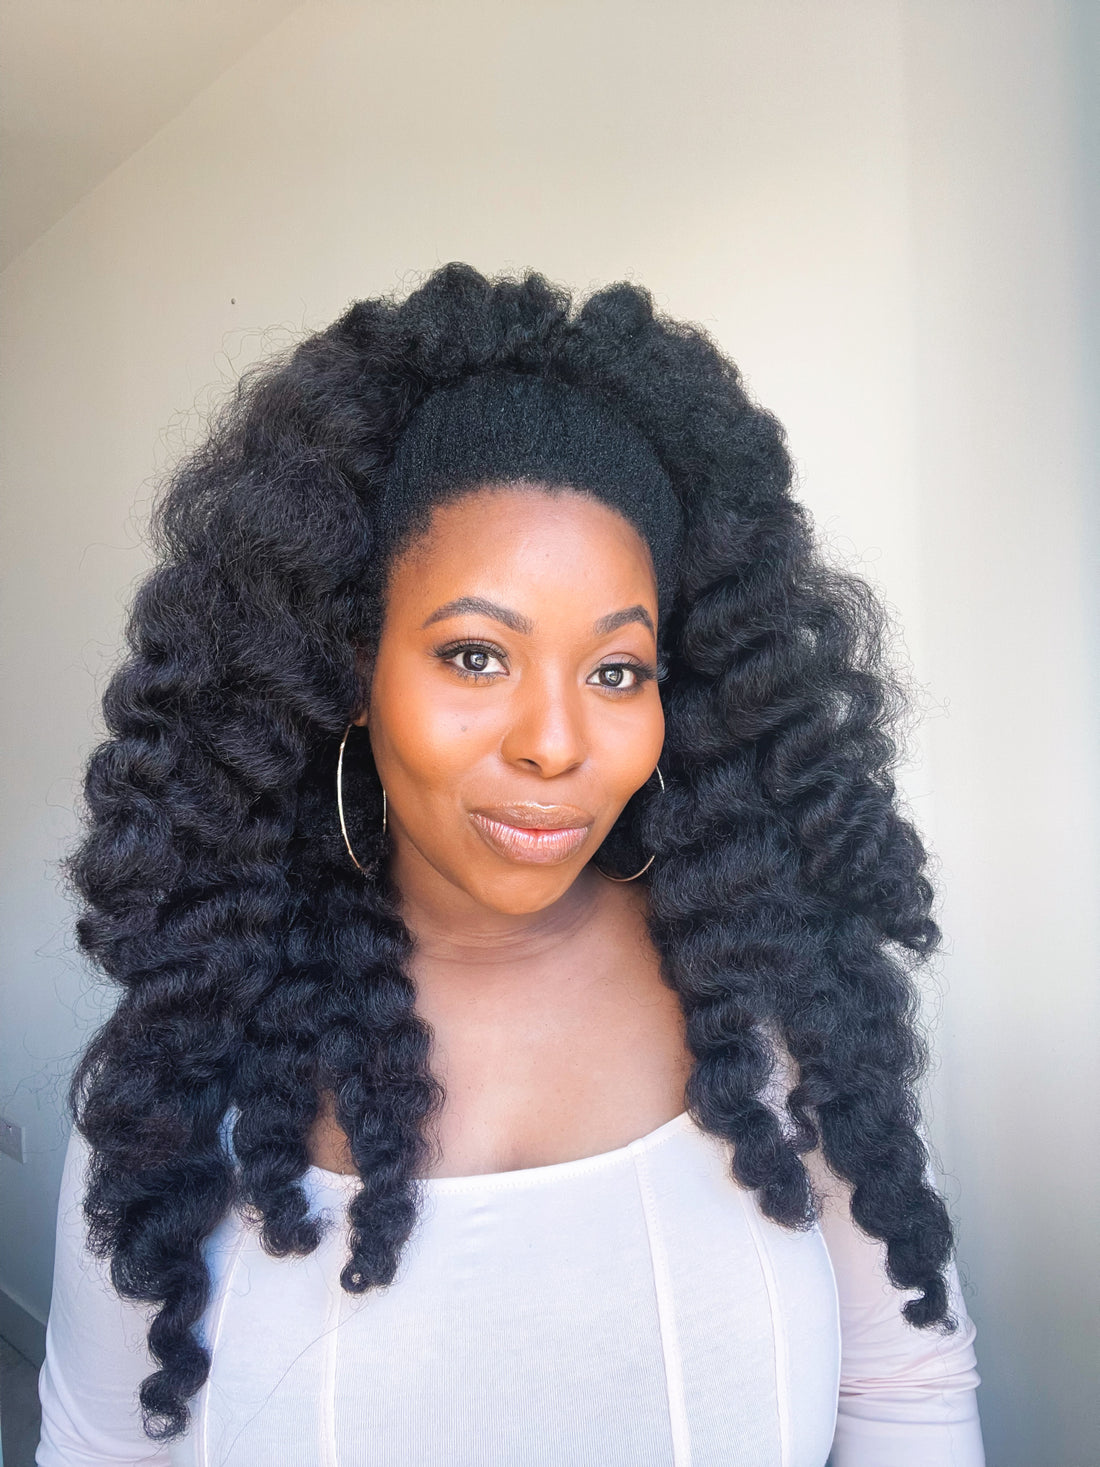 How-To Use One Wig to Blend with Any Texture